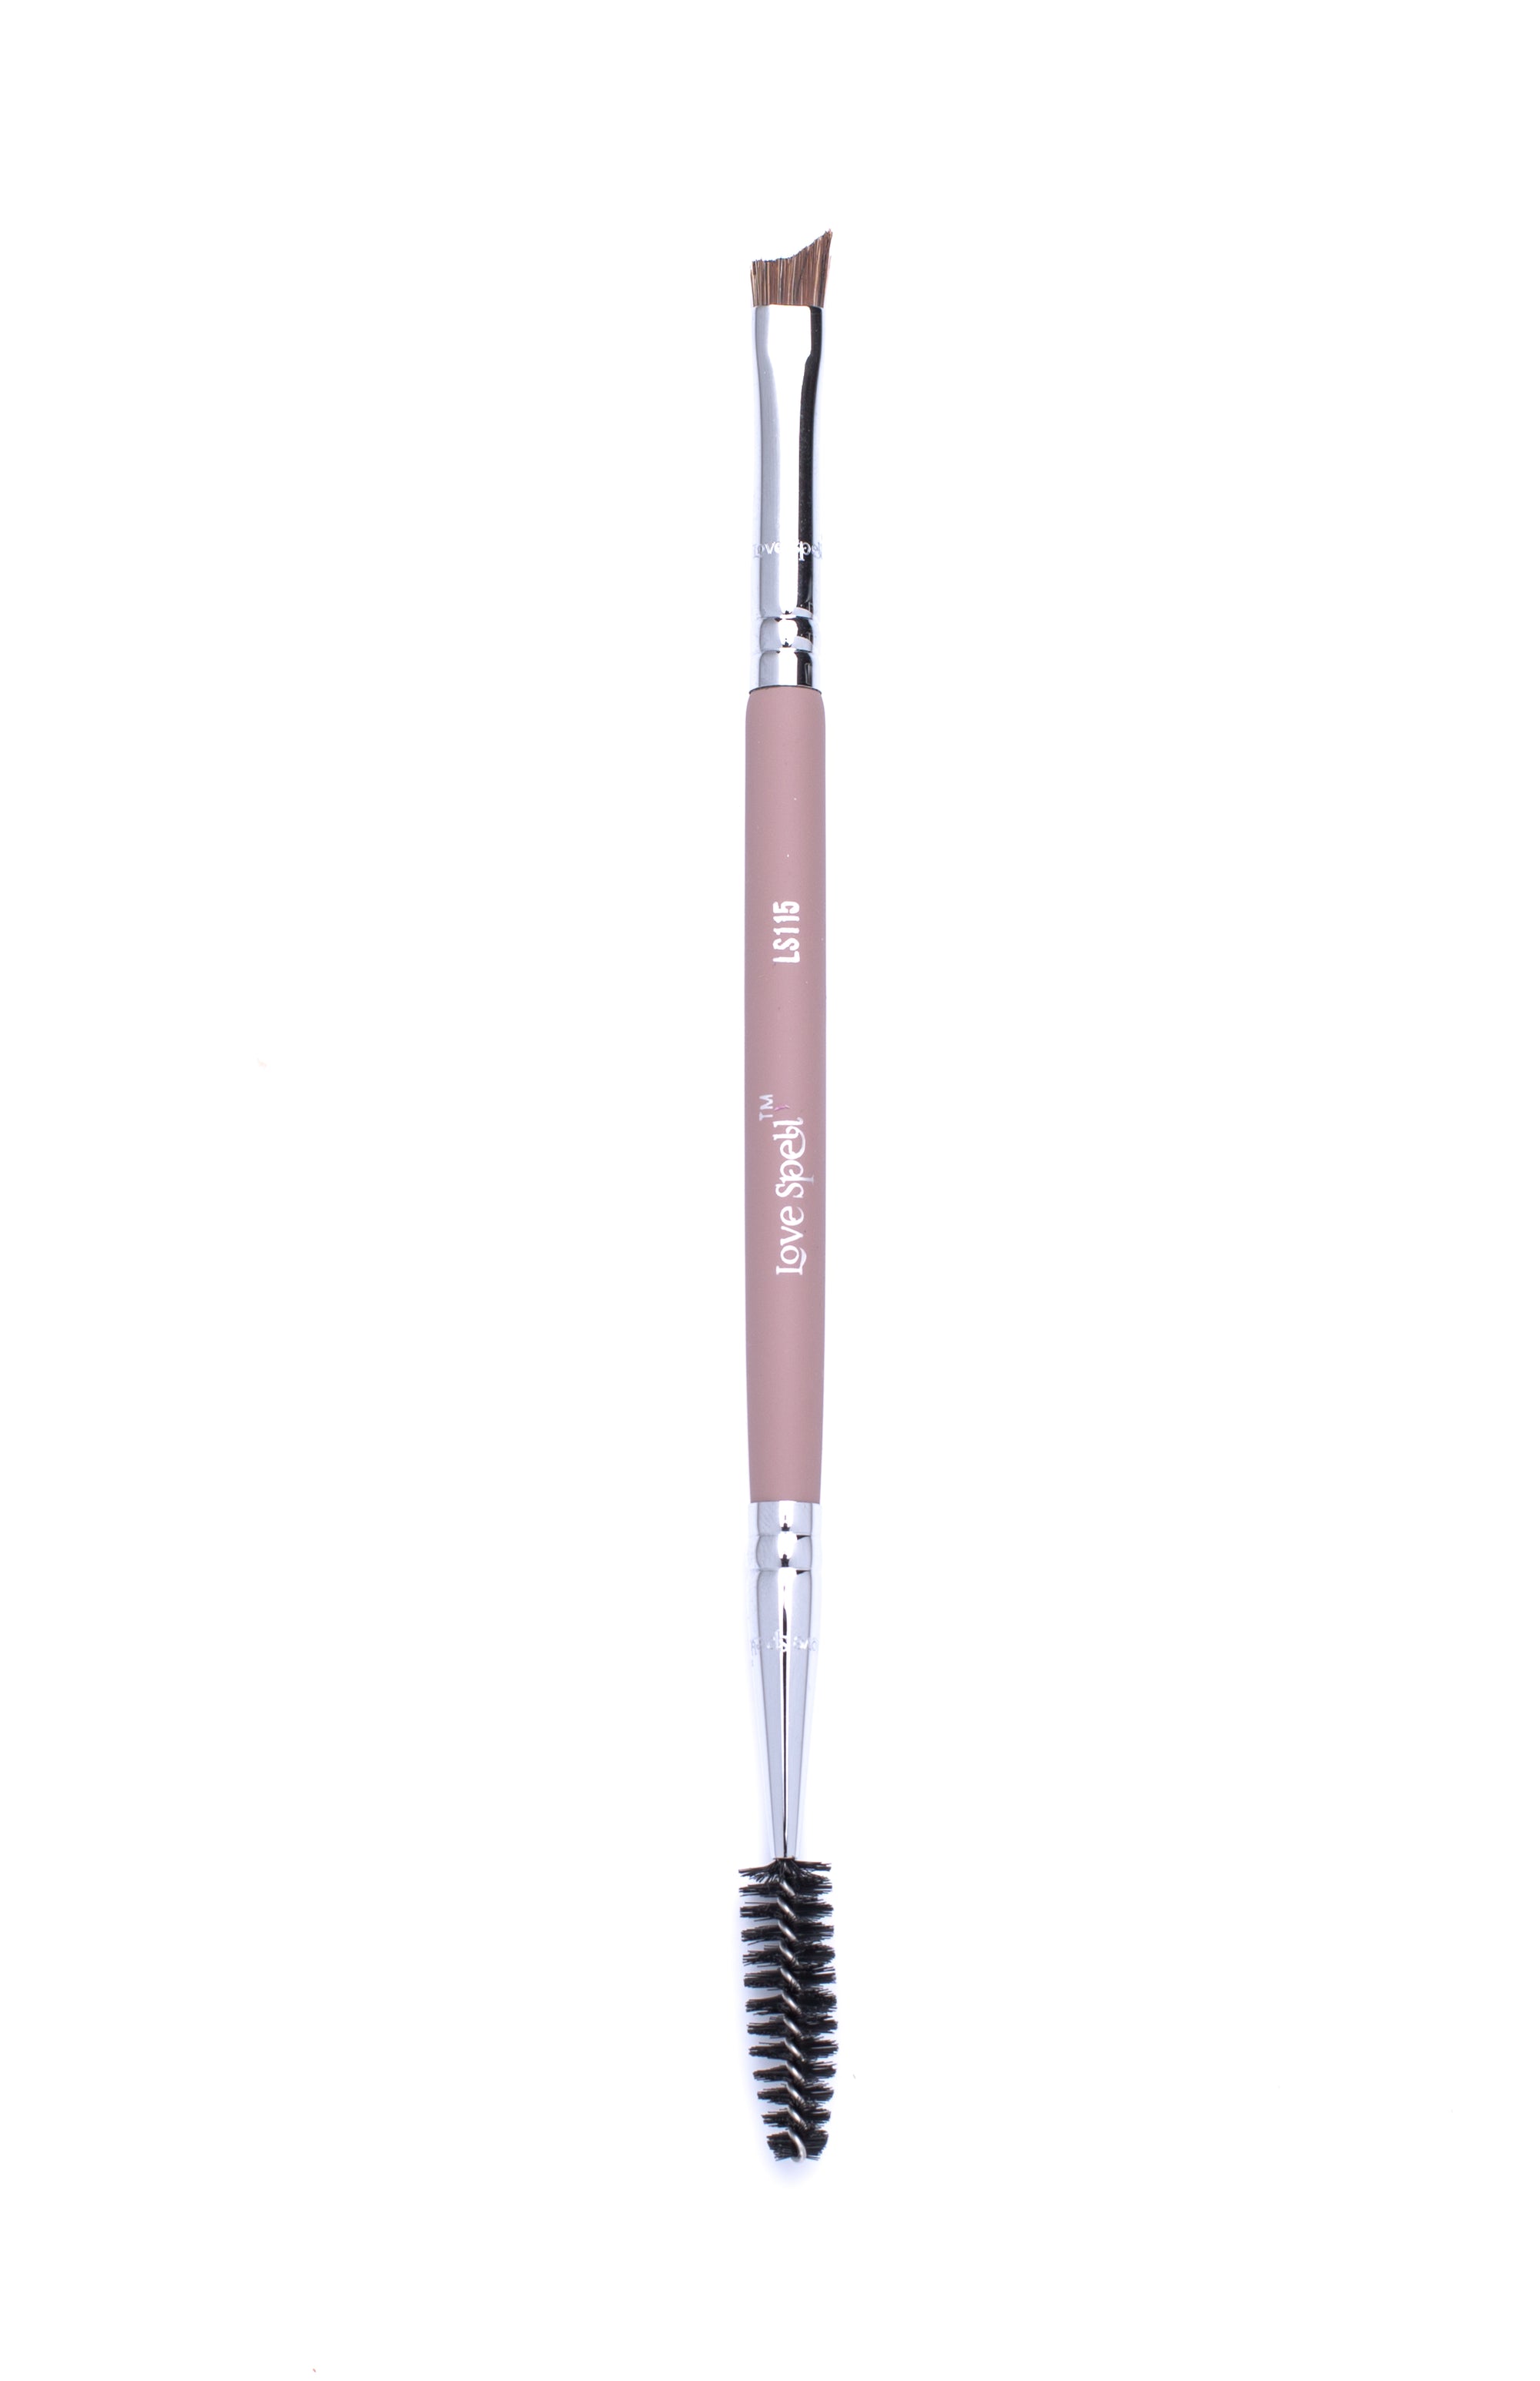 Sally's Spell - LS 115 curved duo eyebrow brush